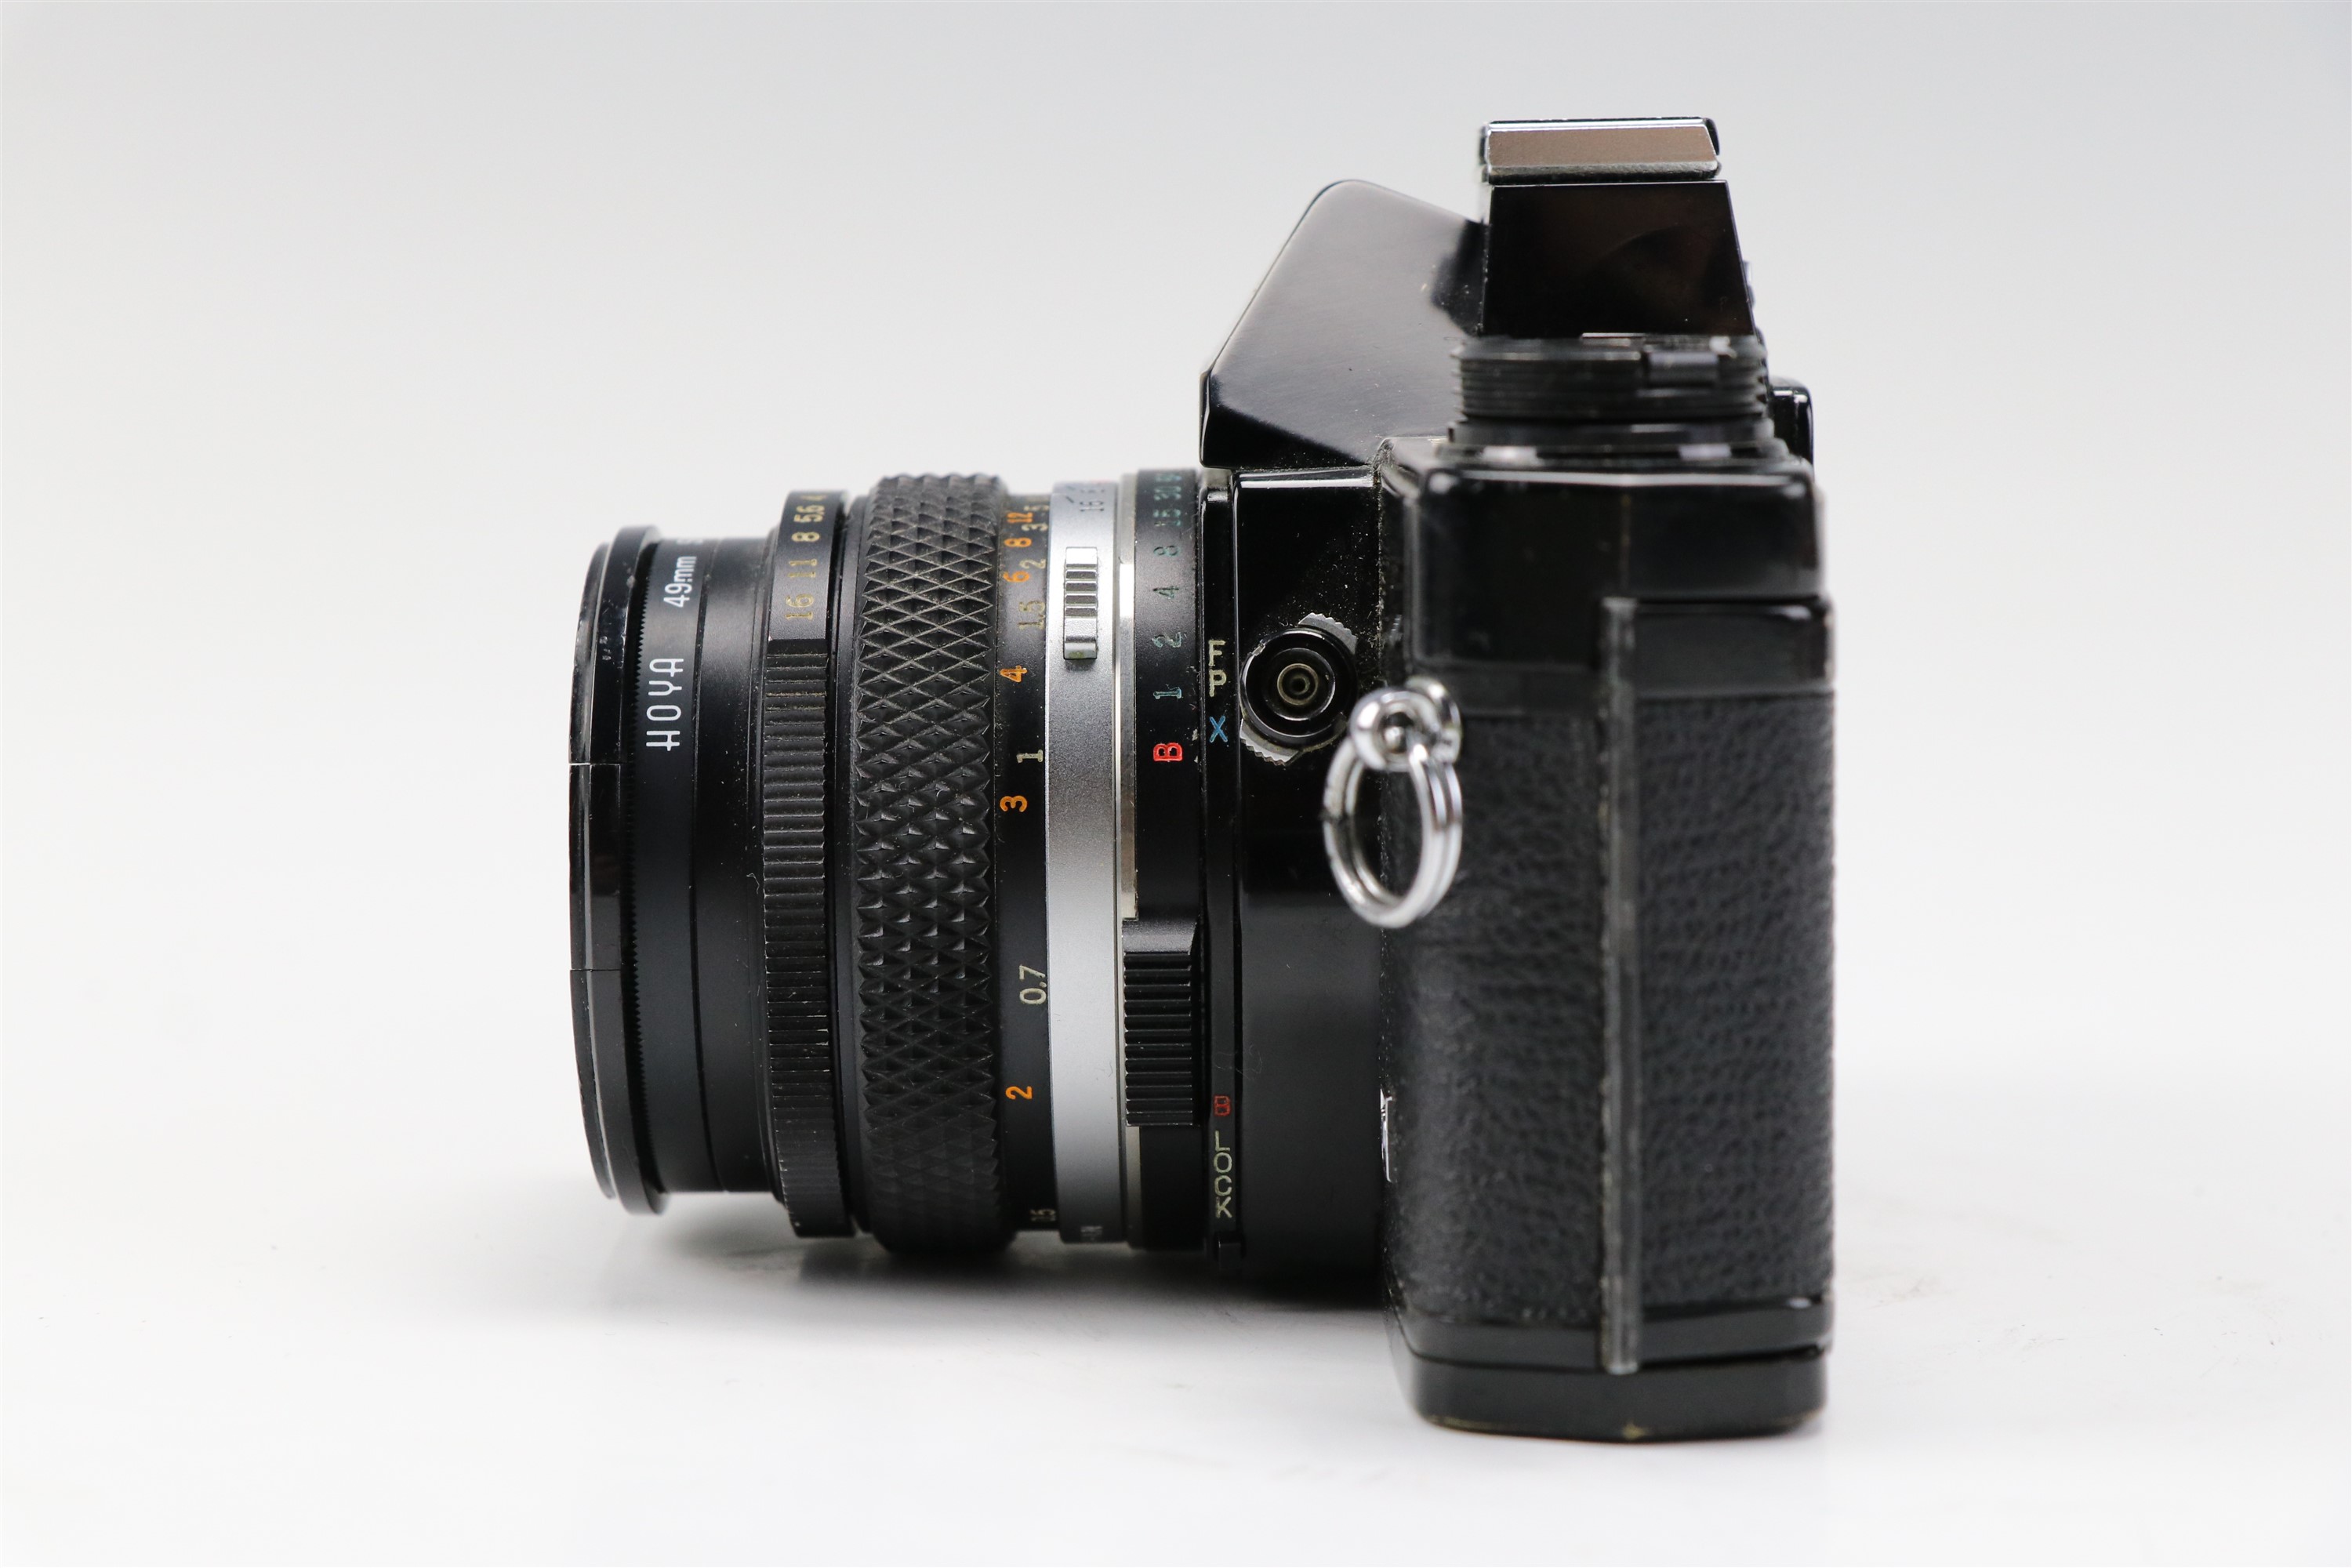 An Olympus OM-2 camera body together with a 1:1,8 f = 50mm lens, a Teleconverter 2X-A lens, a - Image 15 of 19